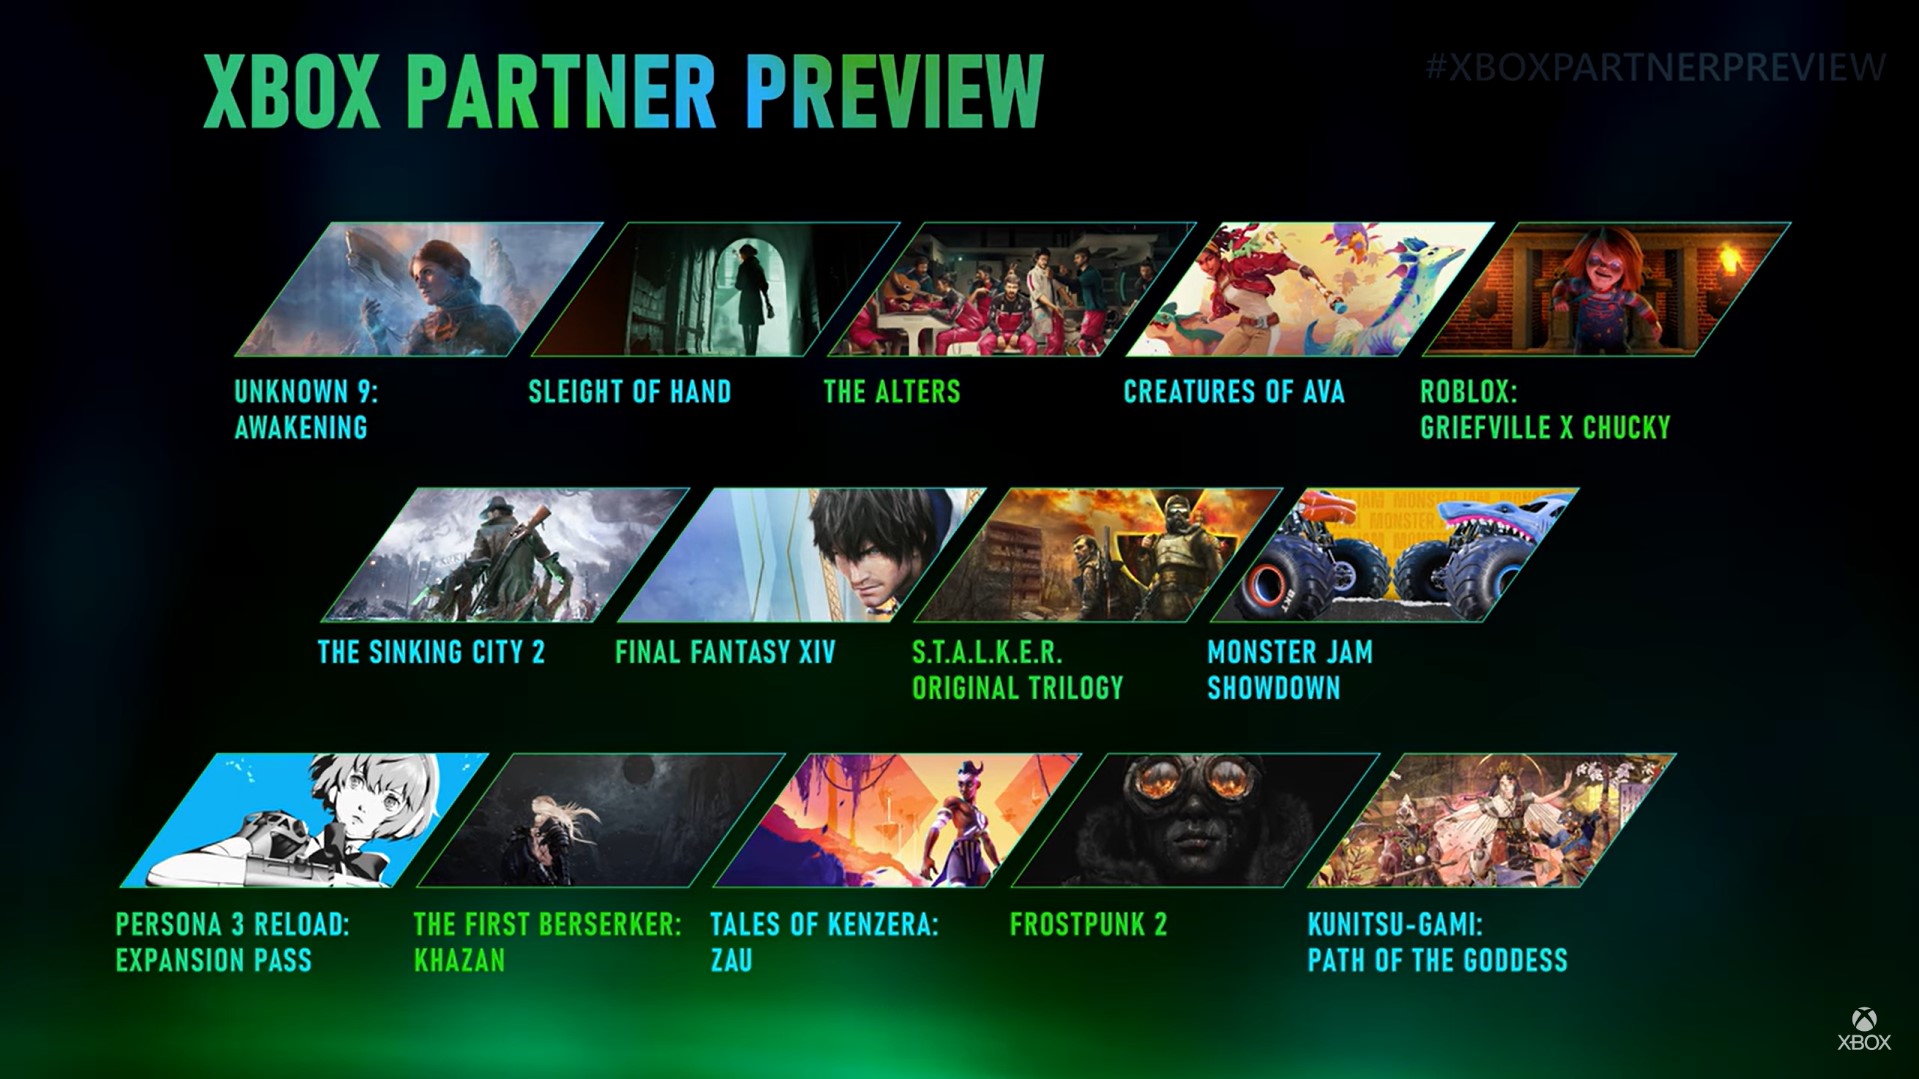 2nd Ever Xbox Partner Preview Adds A Slew Of Games To Our Anticipation List